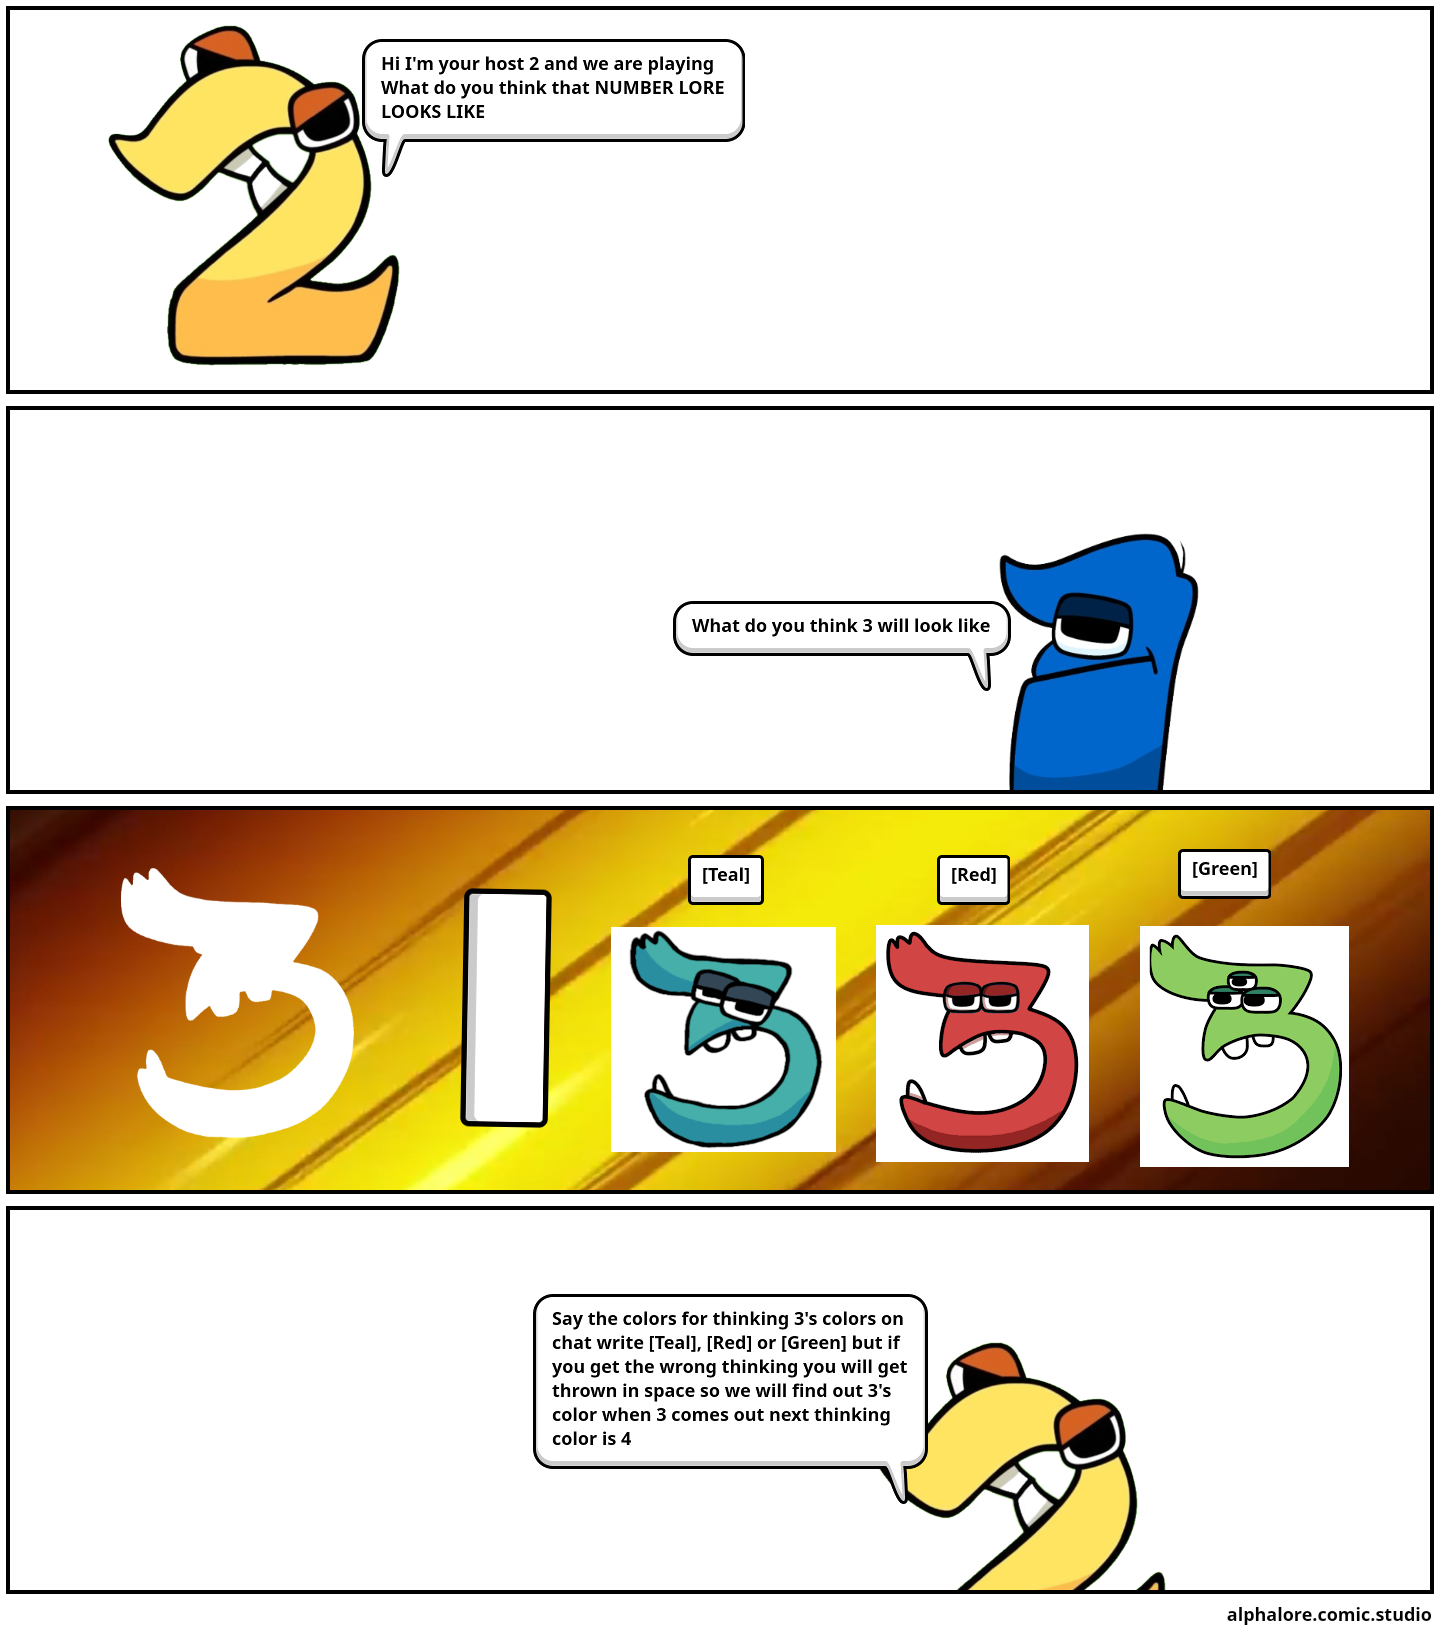 Number Lore But its Interactive (4) - Comic Studio